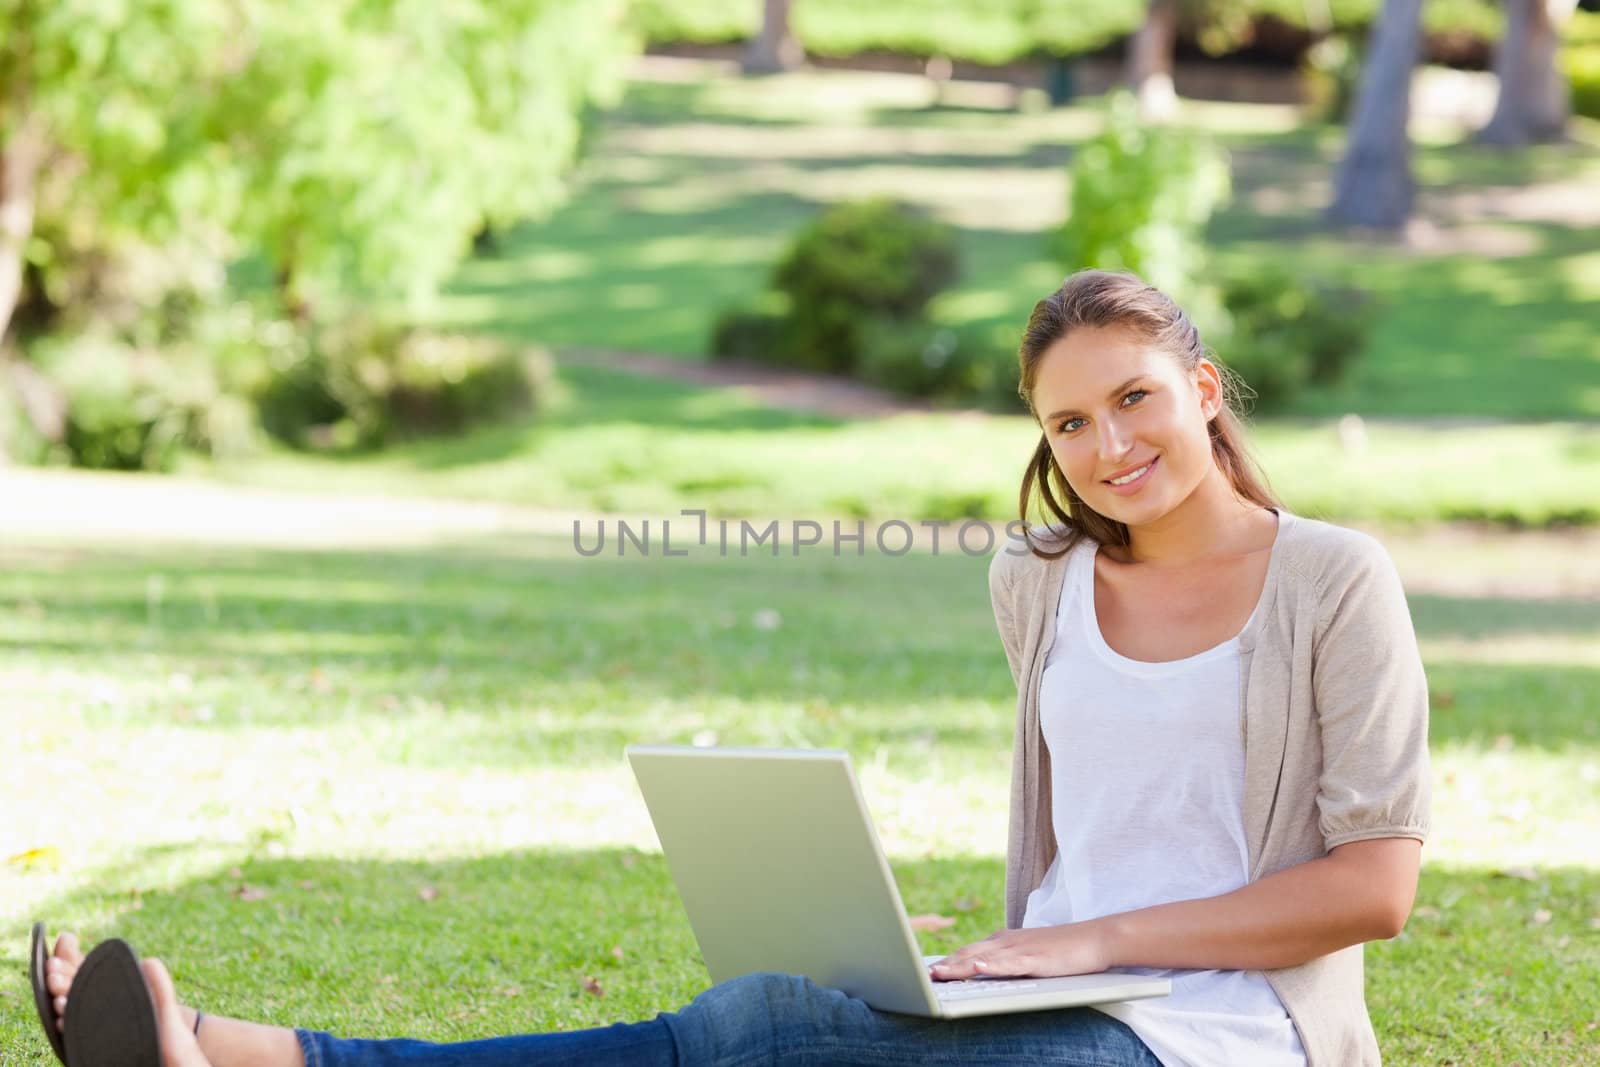 Smiling young woman sitting on the grass with her laptop